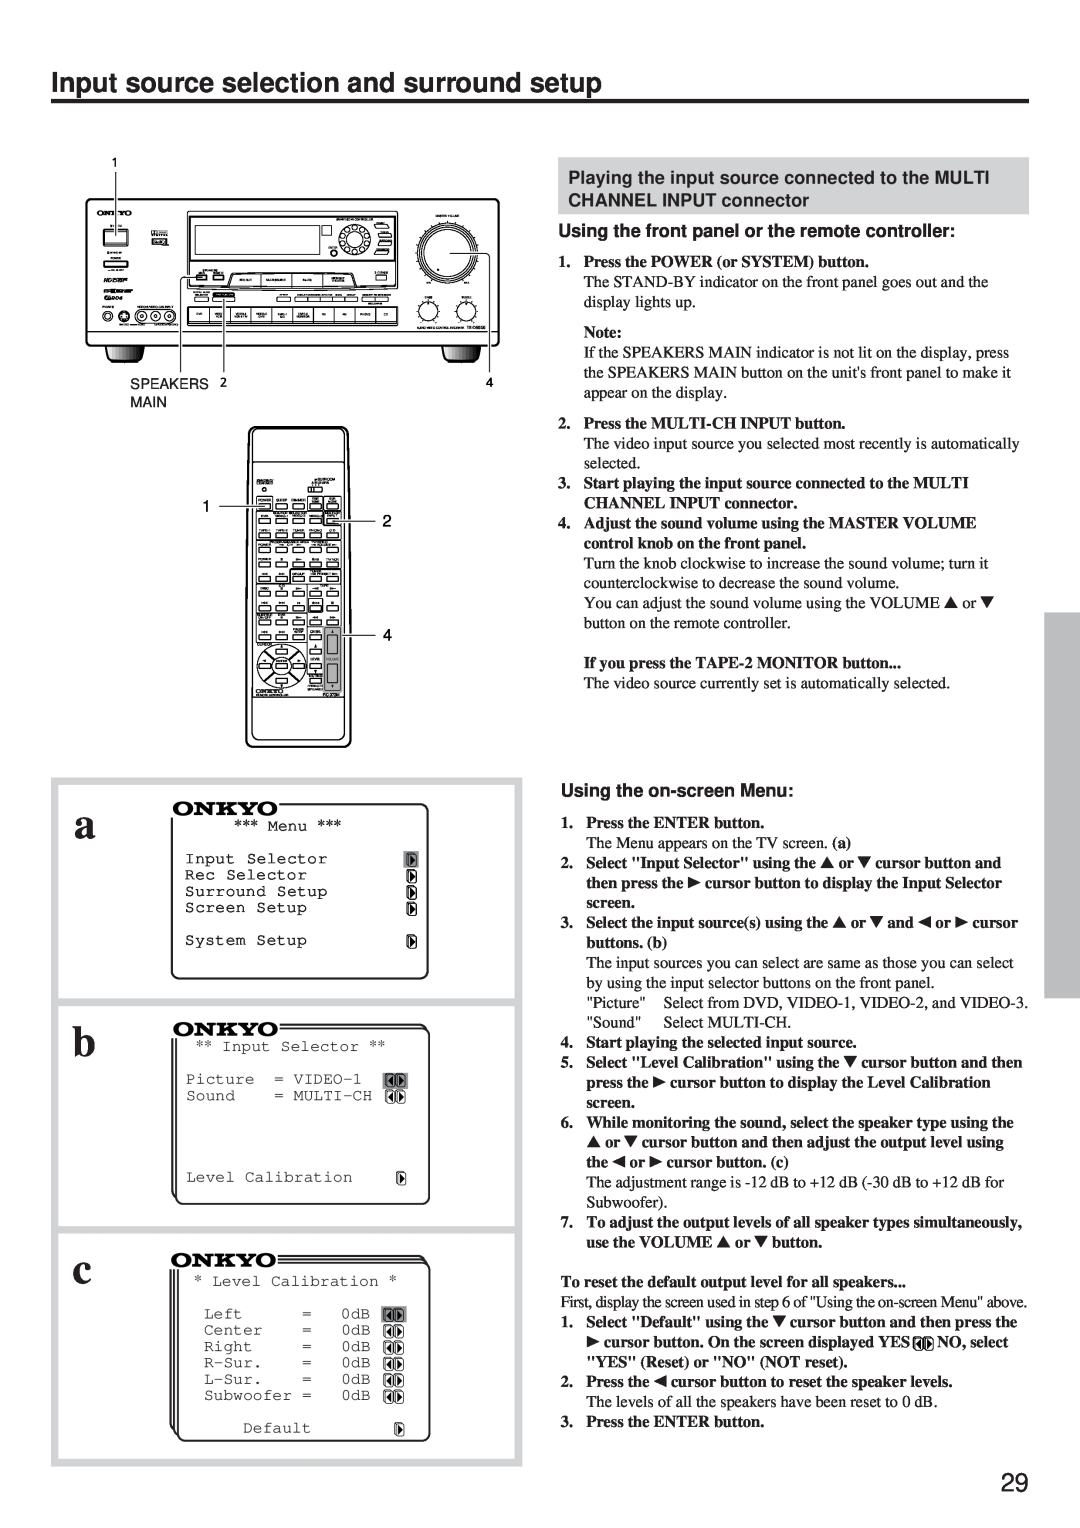 Onkyo TX-DS656 instruction manual Input source selection and surround setup, Using the front panel or the remote controller 